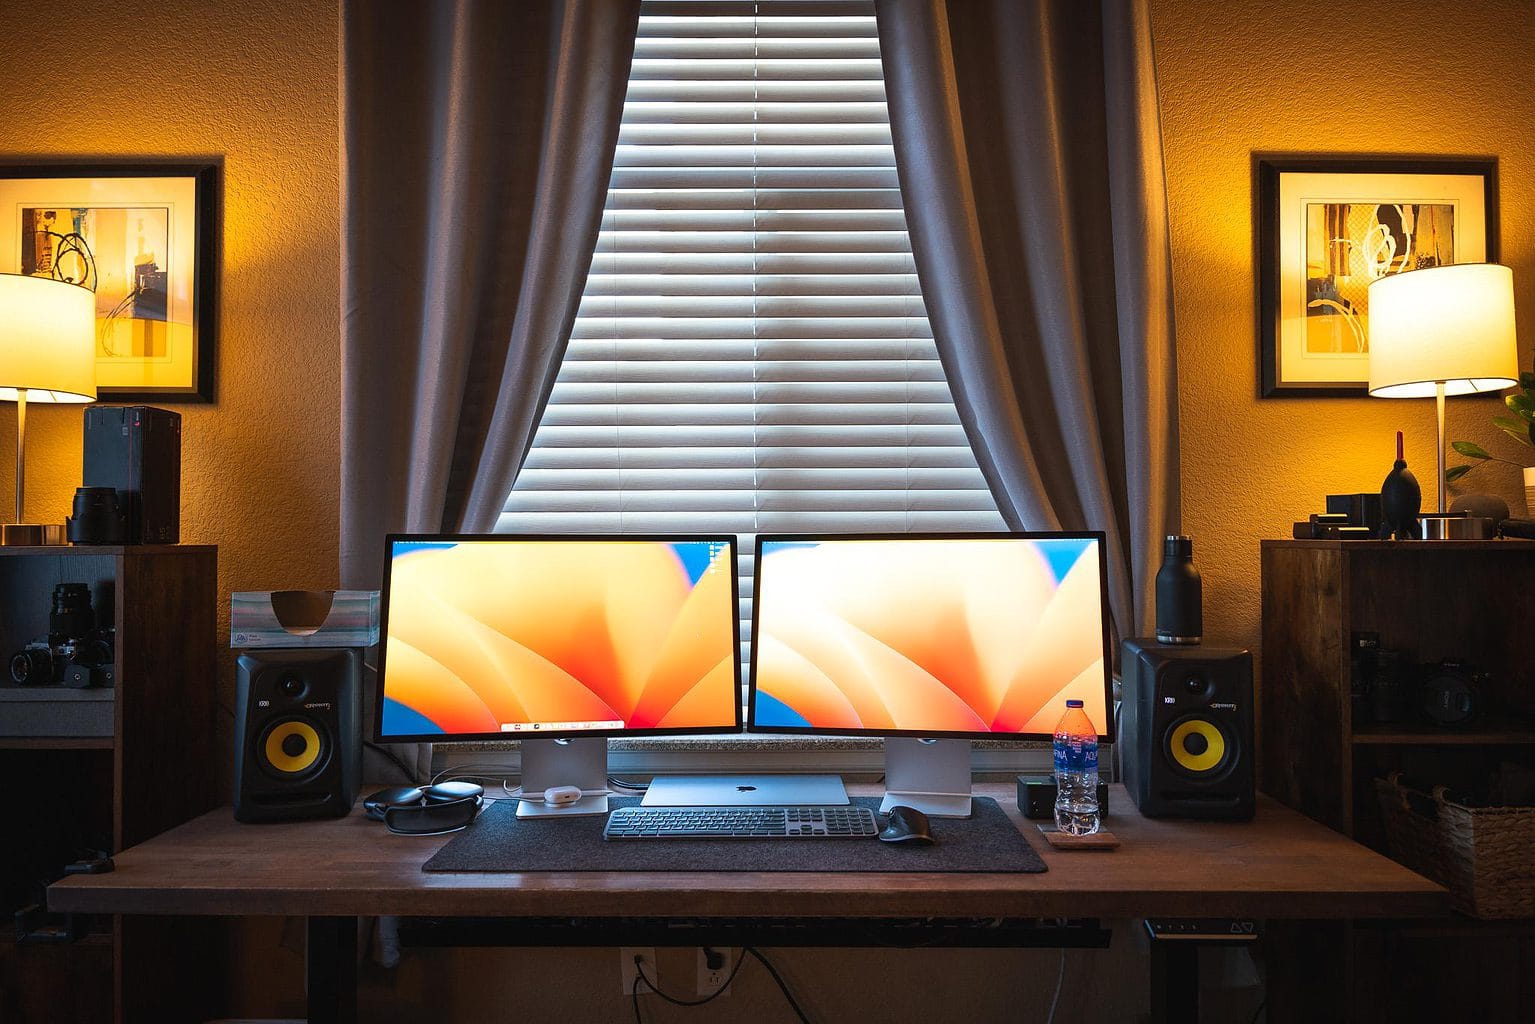 There's nothing like a warmly lit, super-symmetrical setup.